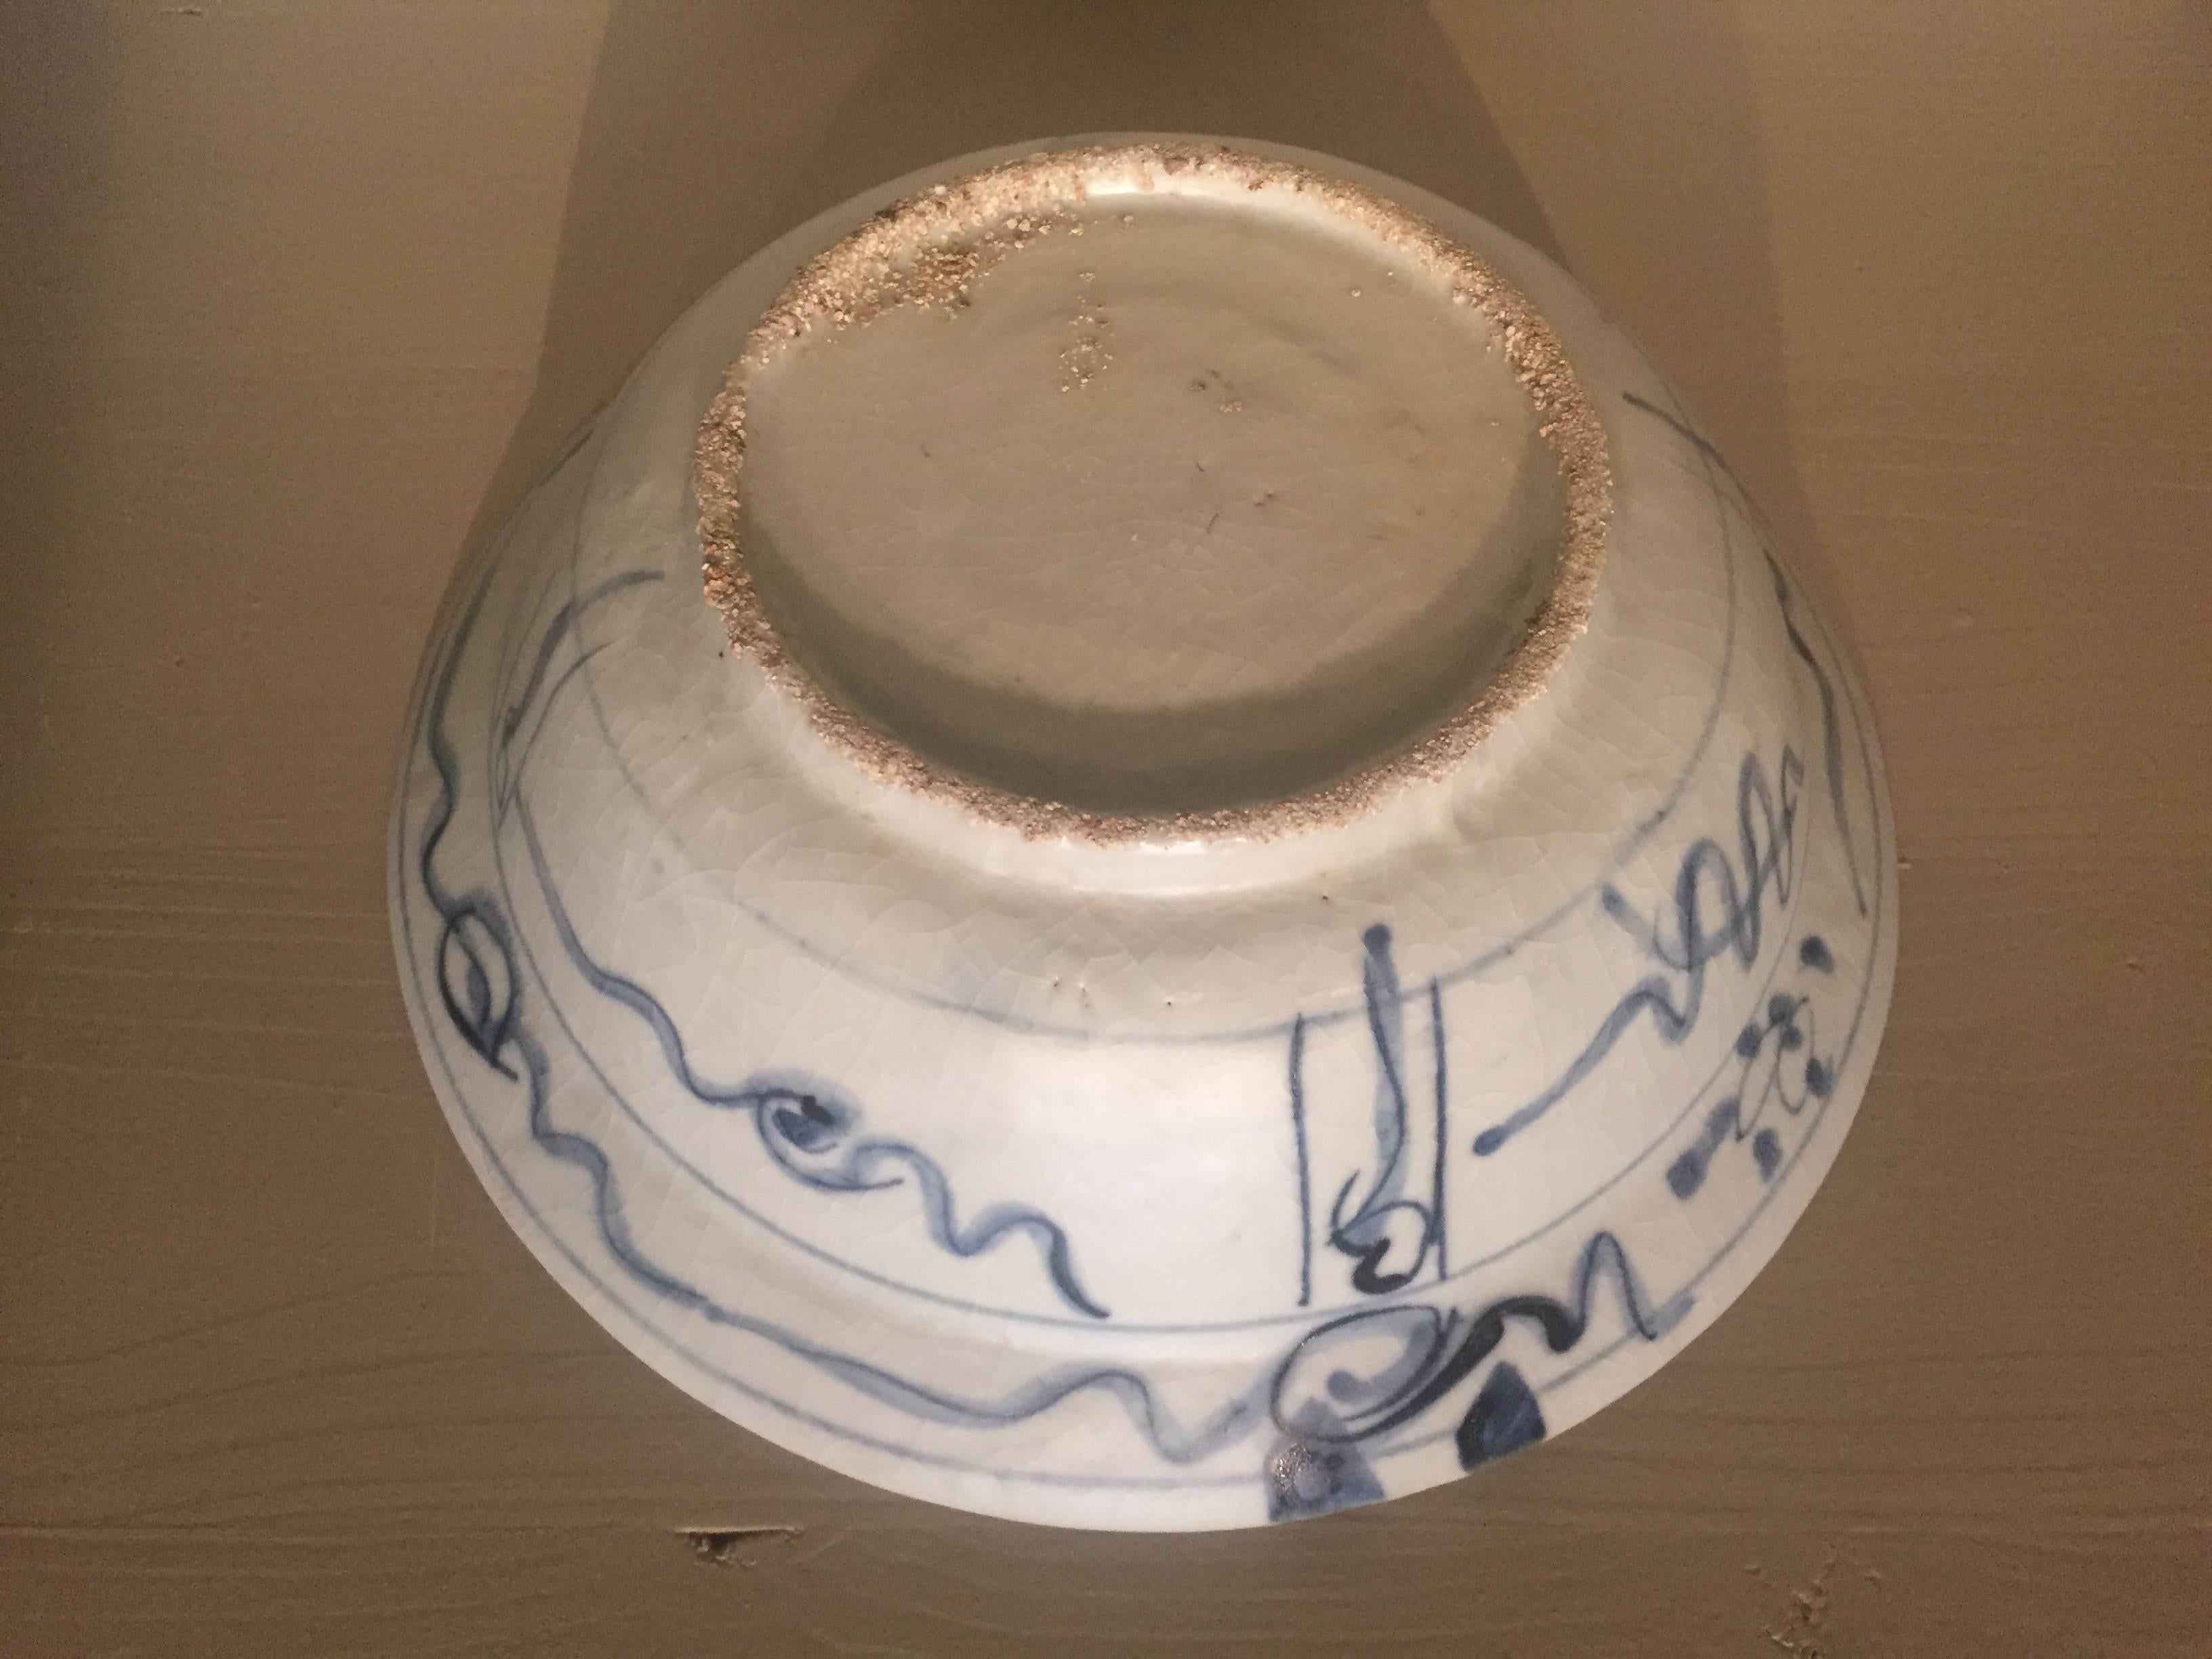 Exceptional plates of a shipwreck in South East Asia.
Blue and white porcelain with traces of sea sand,
China, Ming period, 1368-1644.